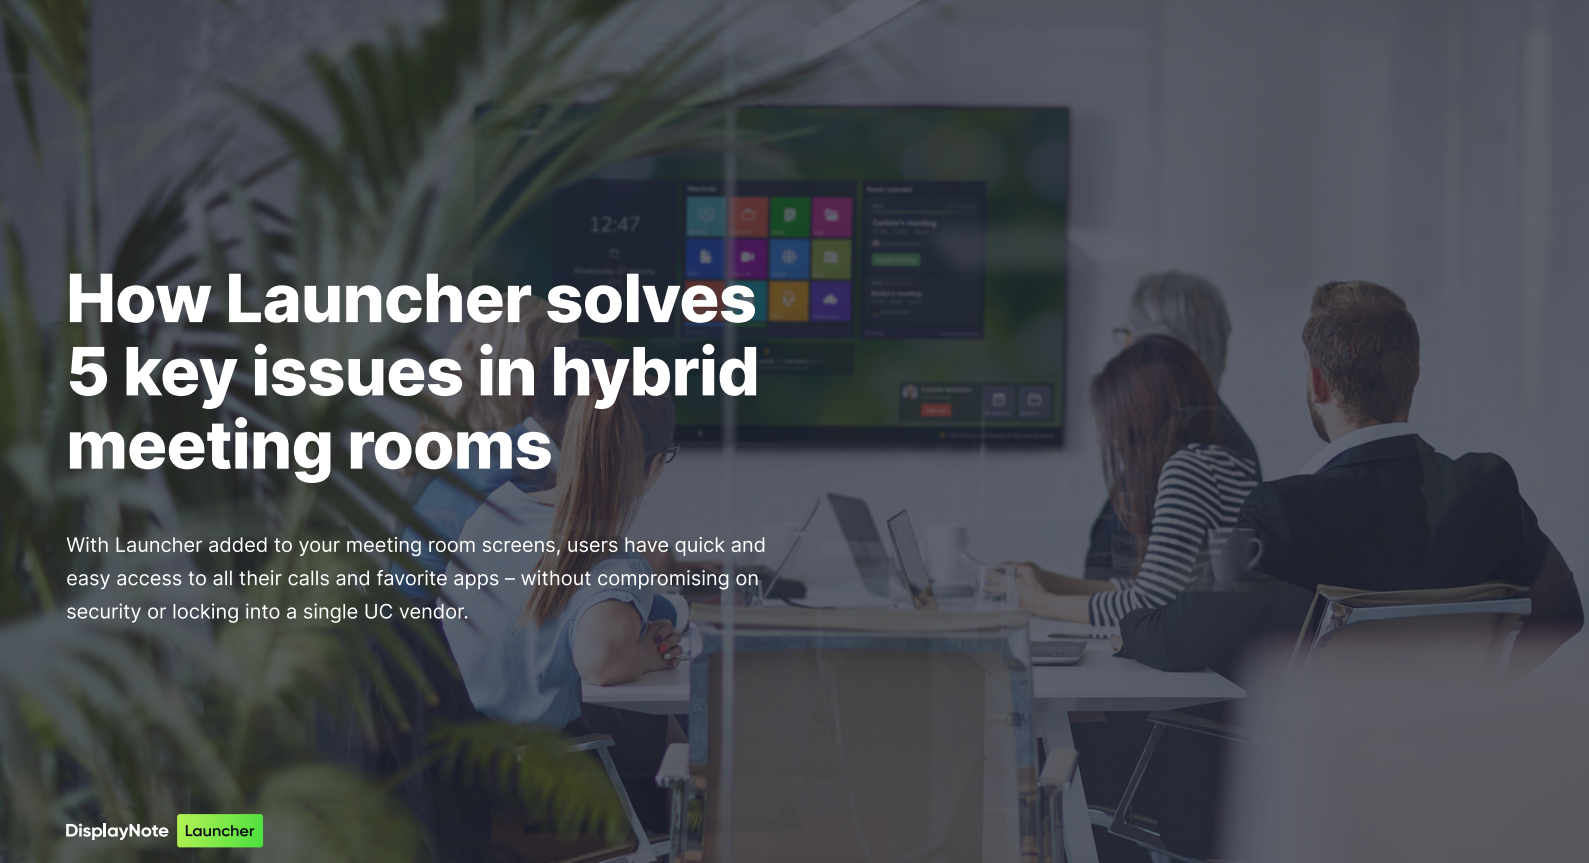 Downloadable pdf resource - How Launcher solves 5 key issues in hybrid meeting rooms